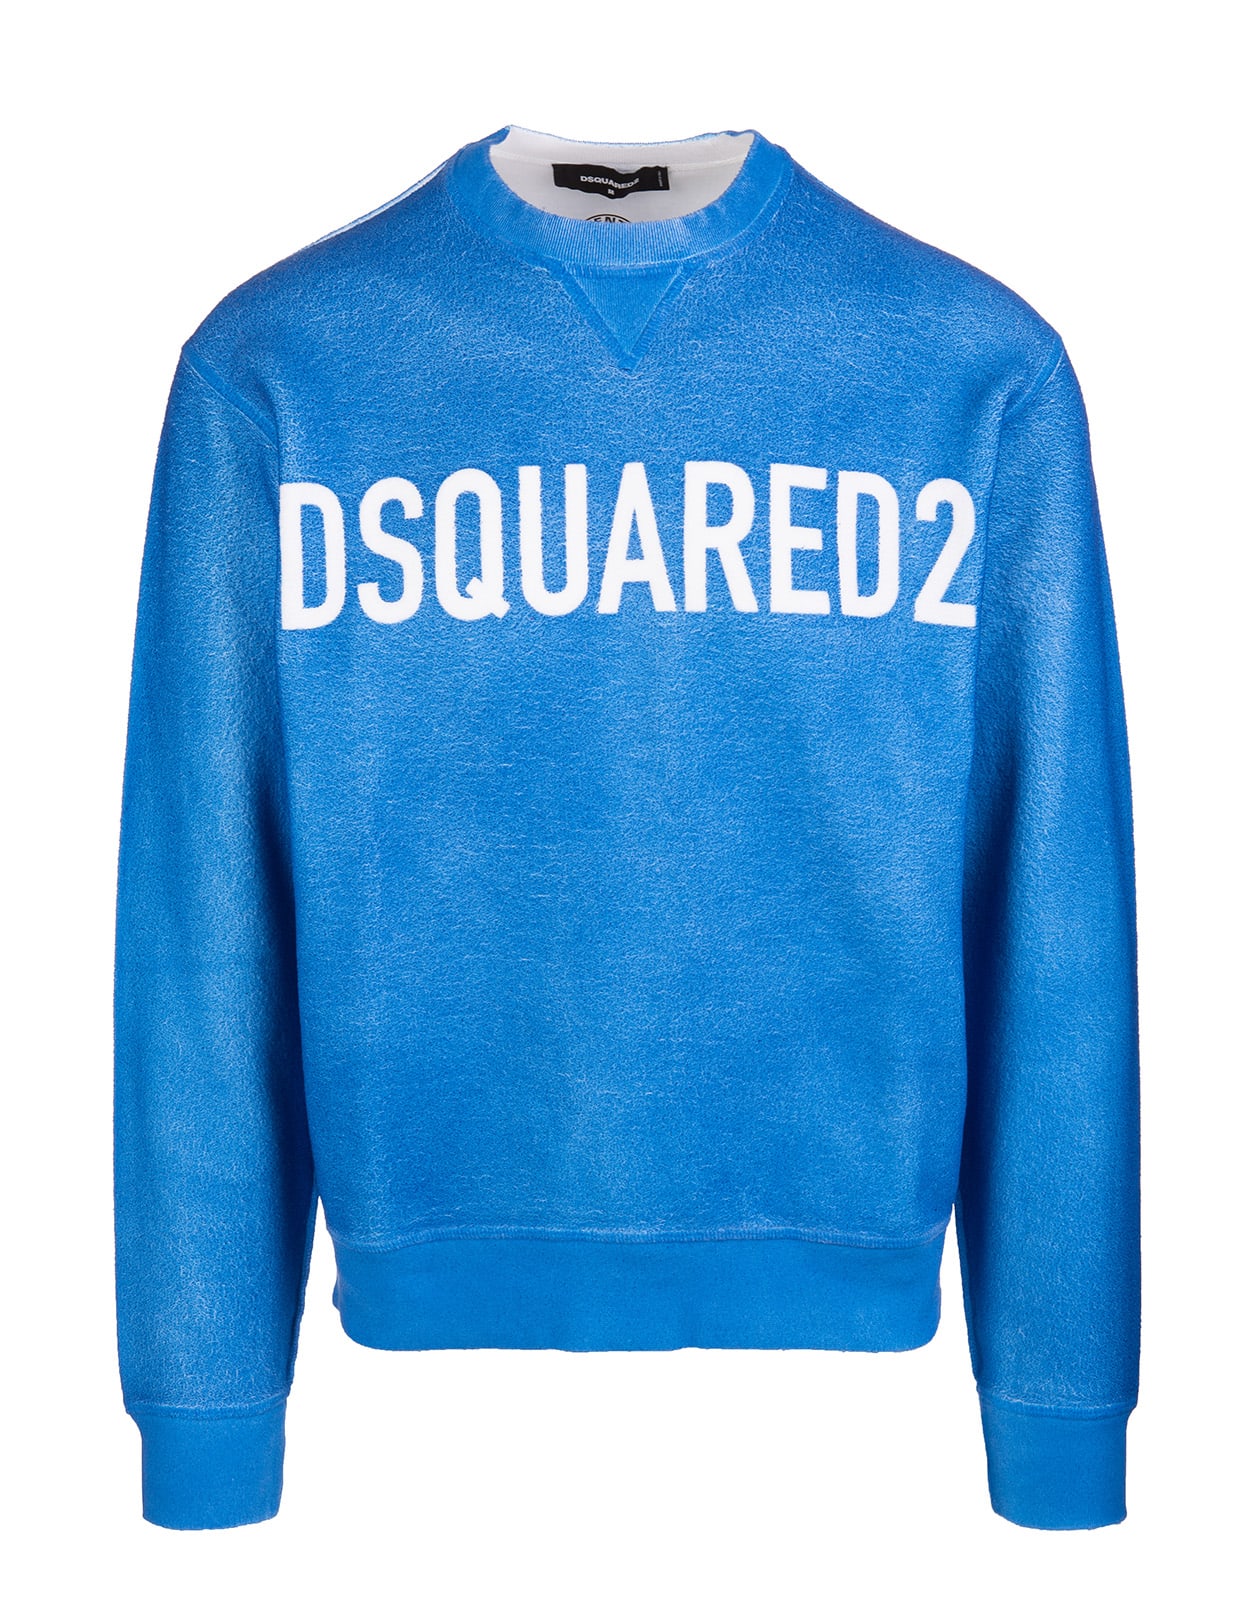 Dsquared2 Man Blue Airbrush Cool Sweater